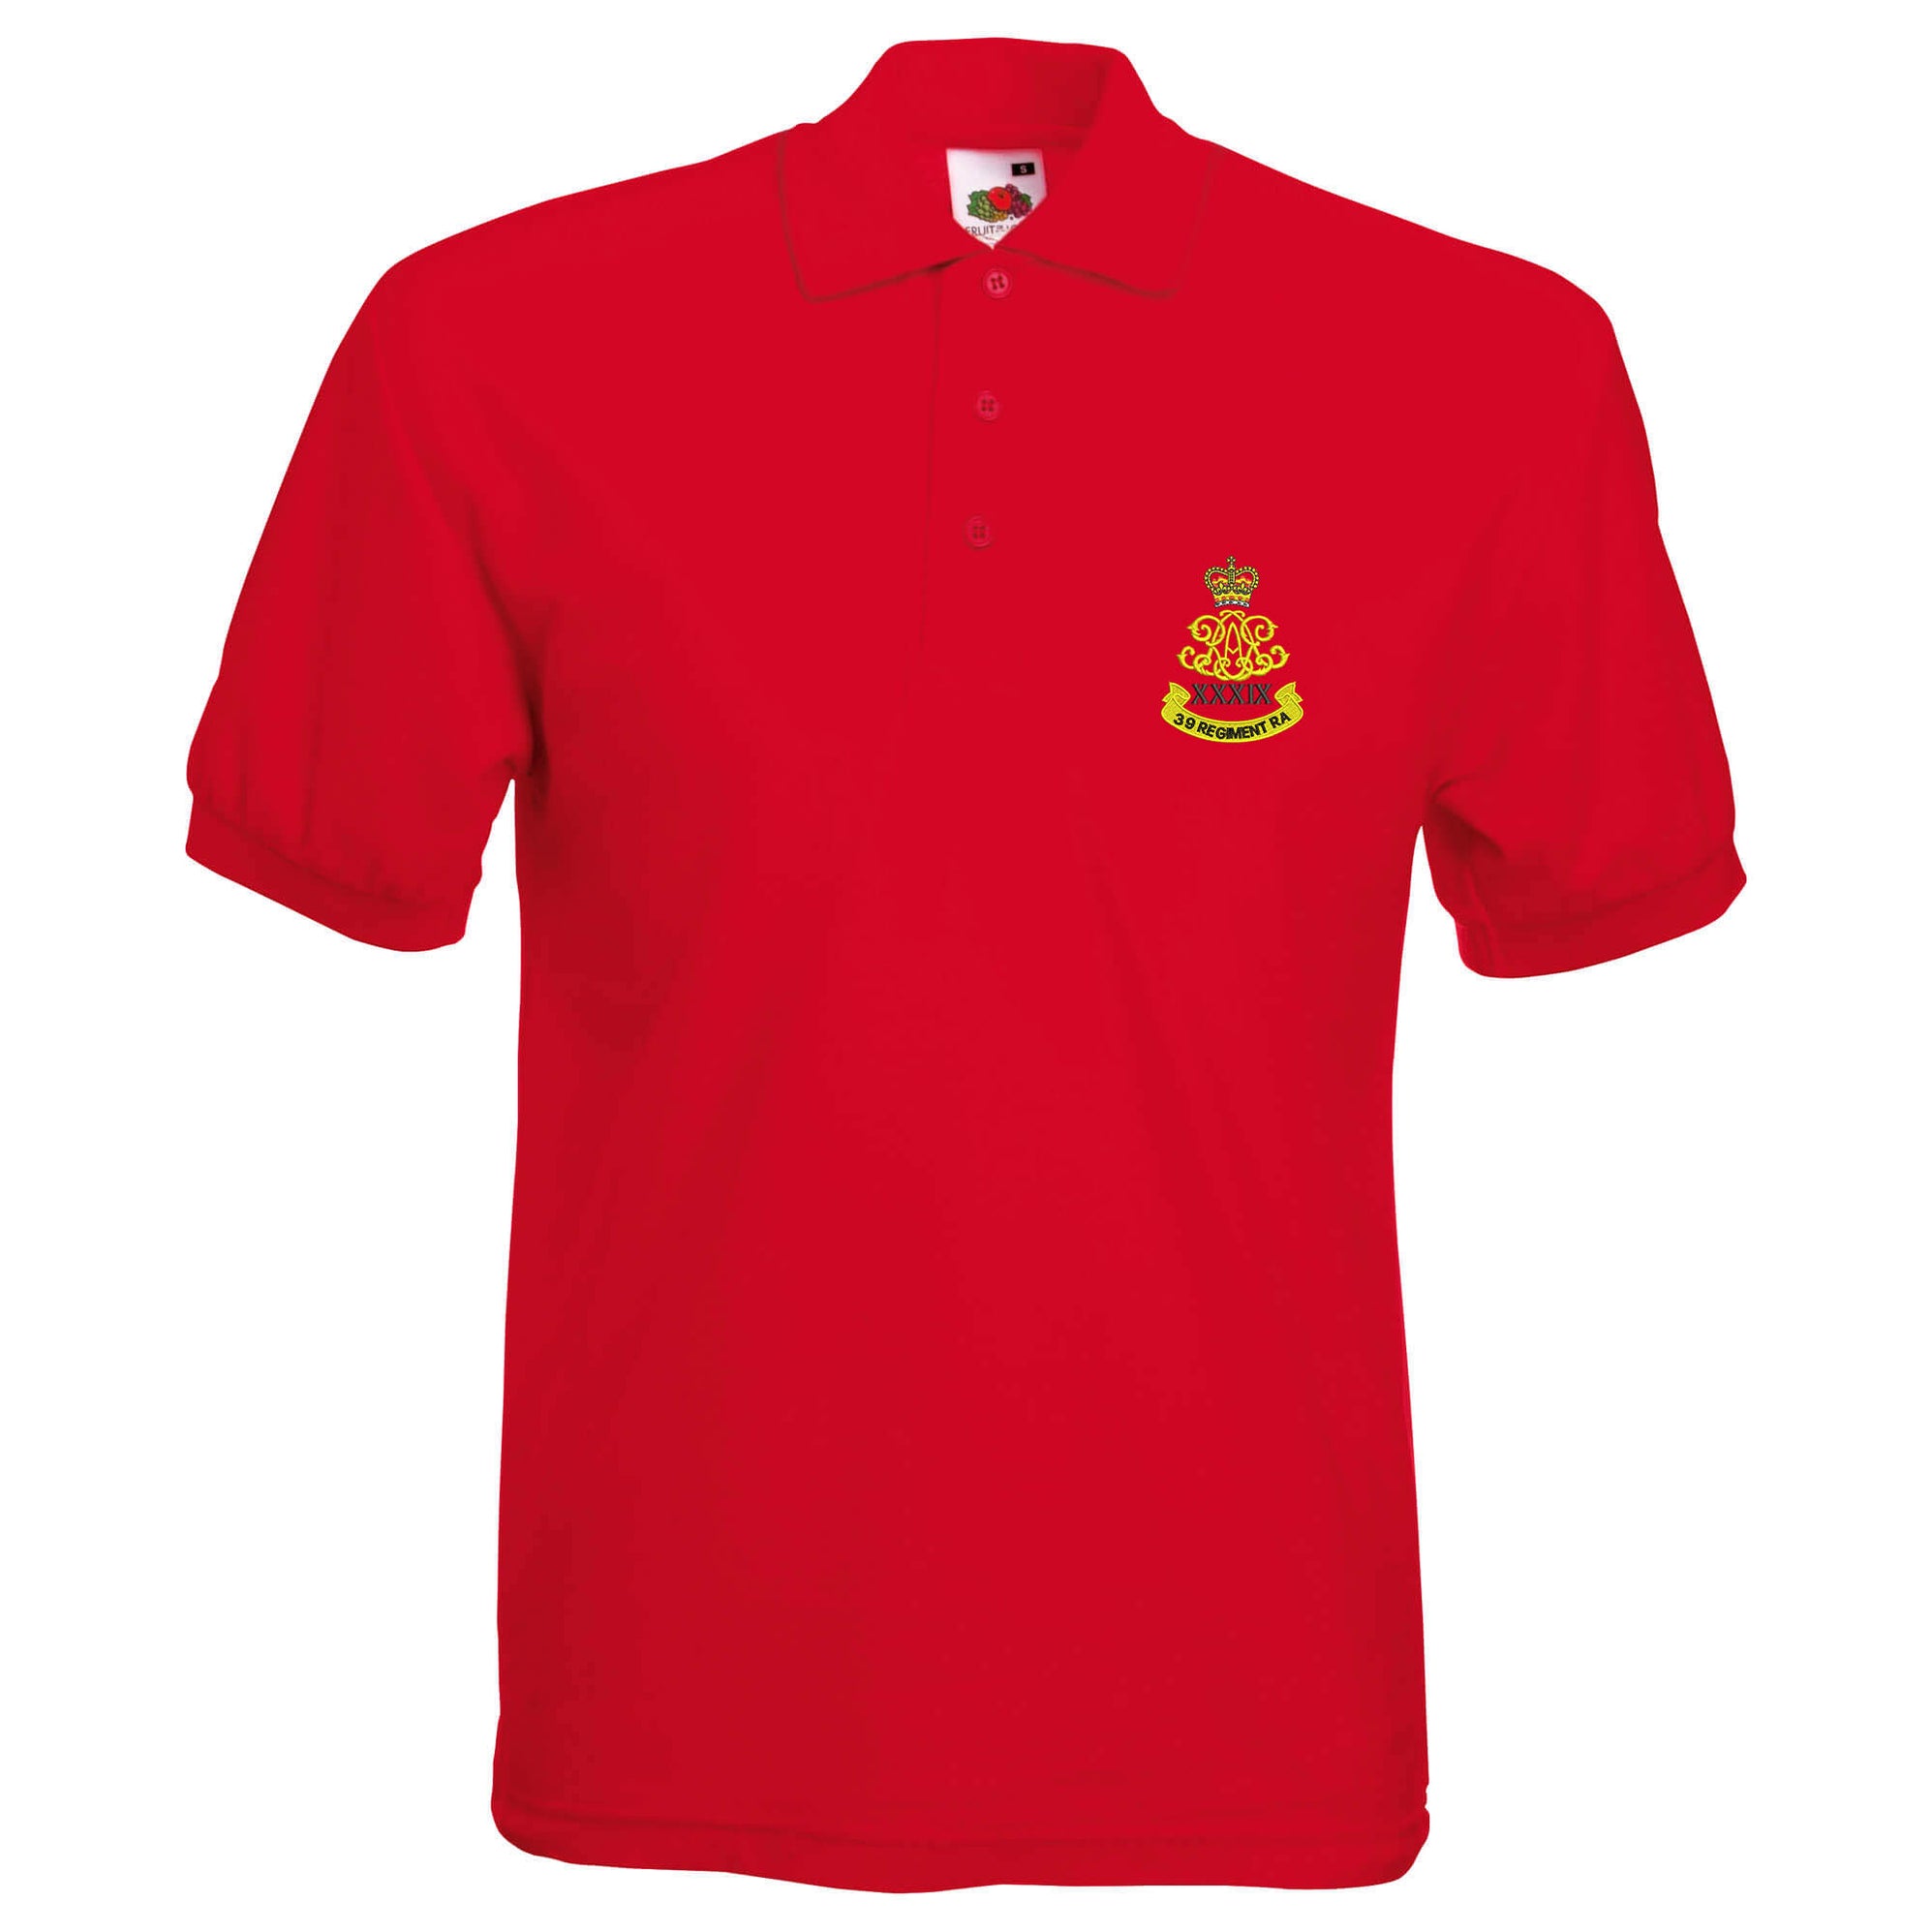 39th Regiment Royal Artillery Polo Shirt — The Military Store